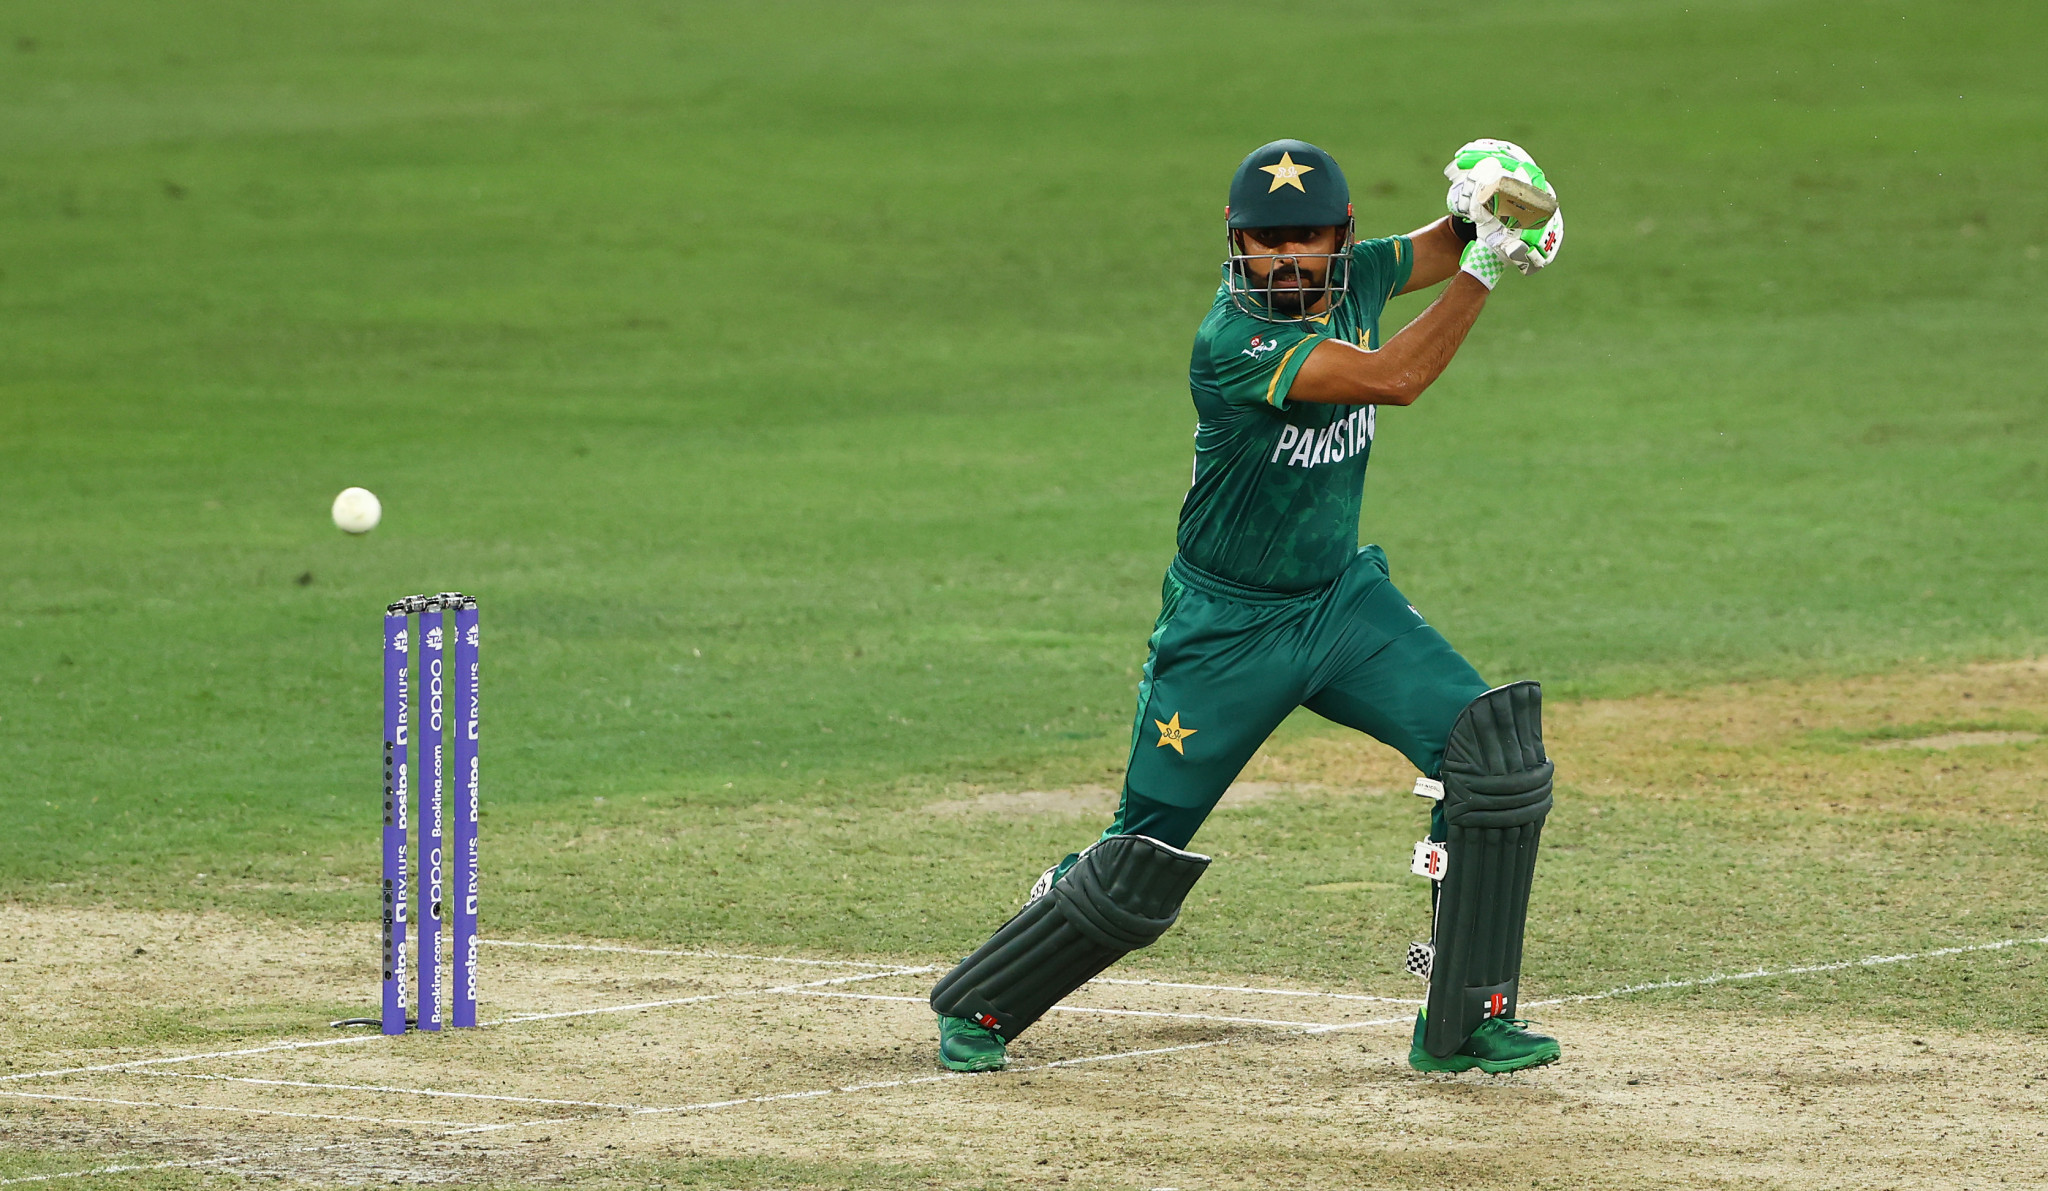 Pakistan captain Babar Azam scored 51 to help his country win by five wickets ©Getty Images 